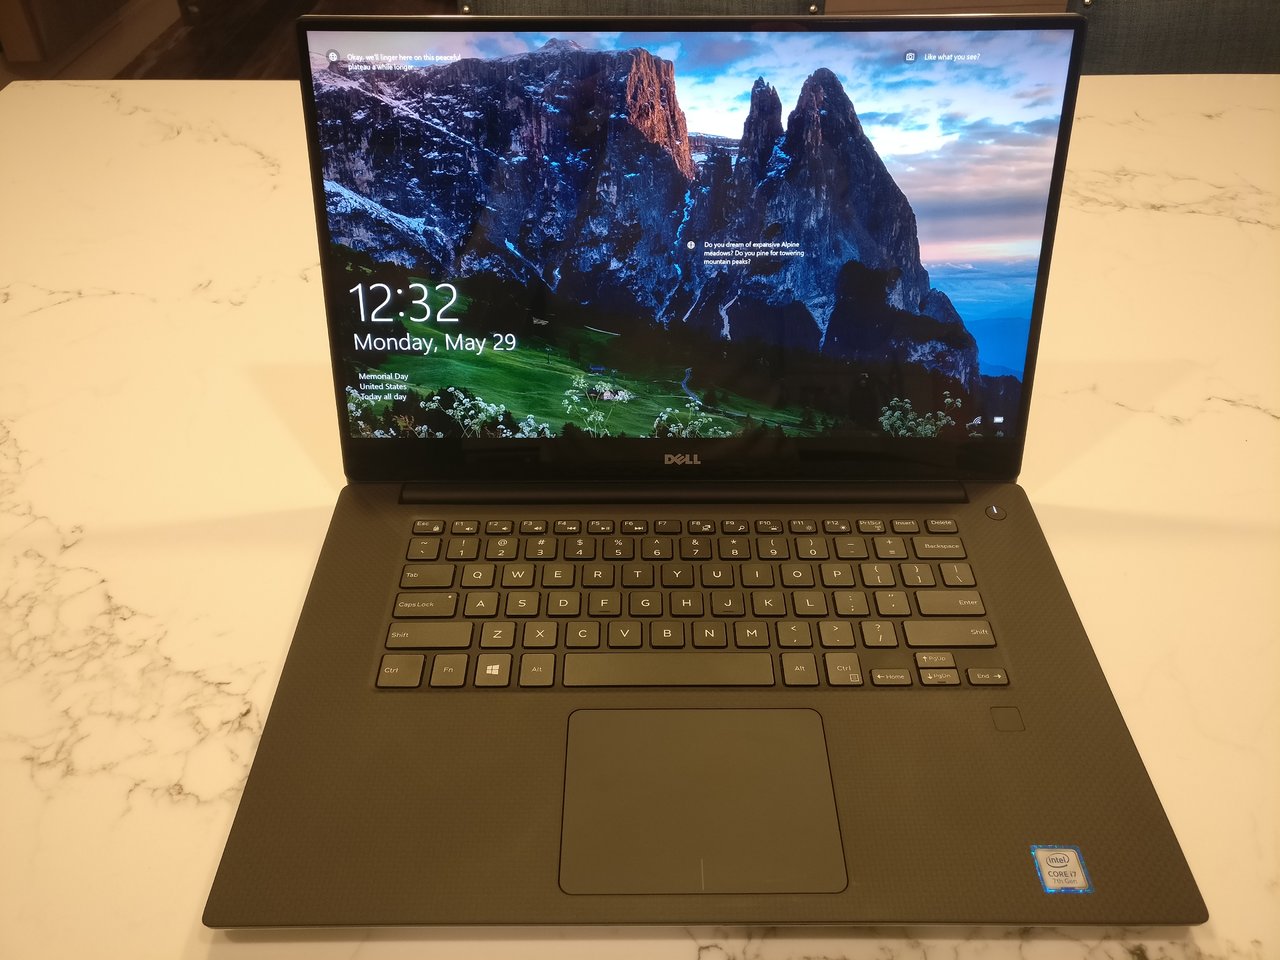 Dell xps 15 9560 review - core i7 cpu, 1050 gpu and uhd screen